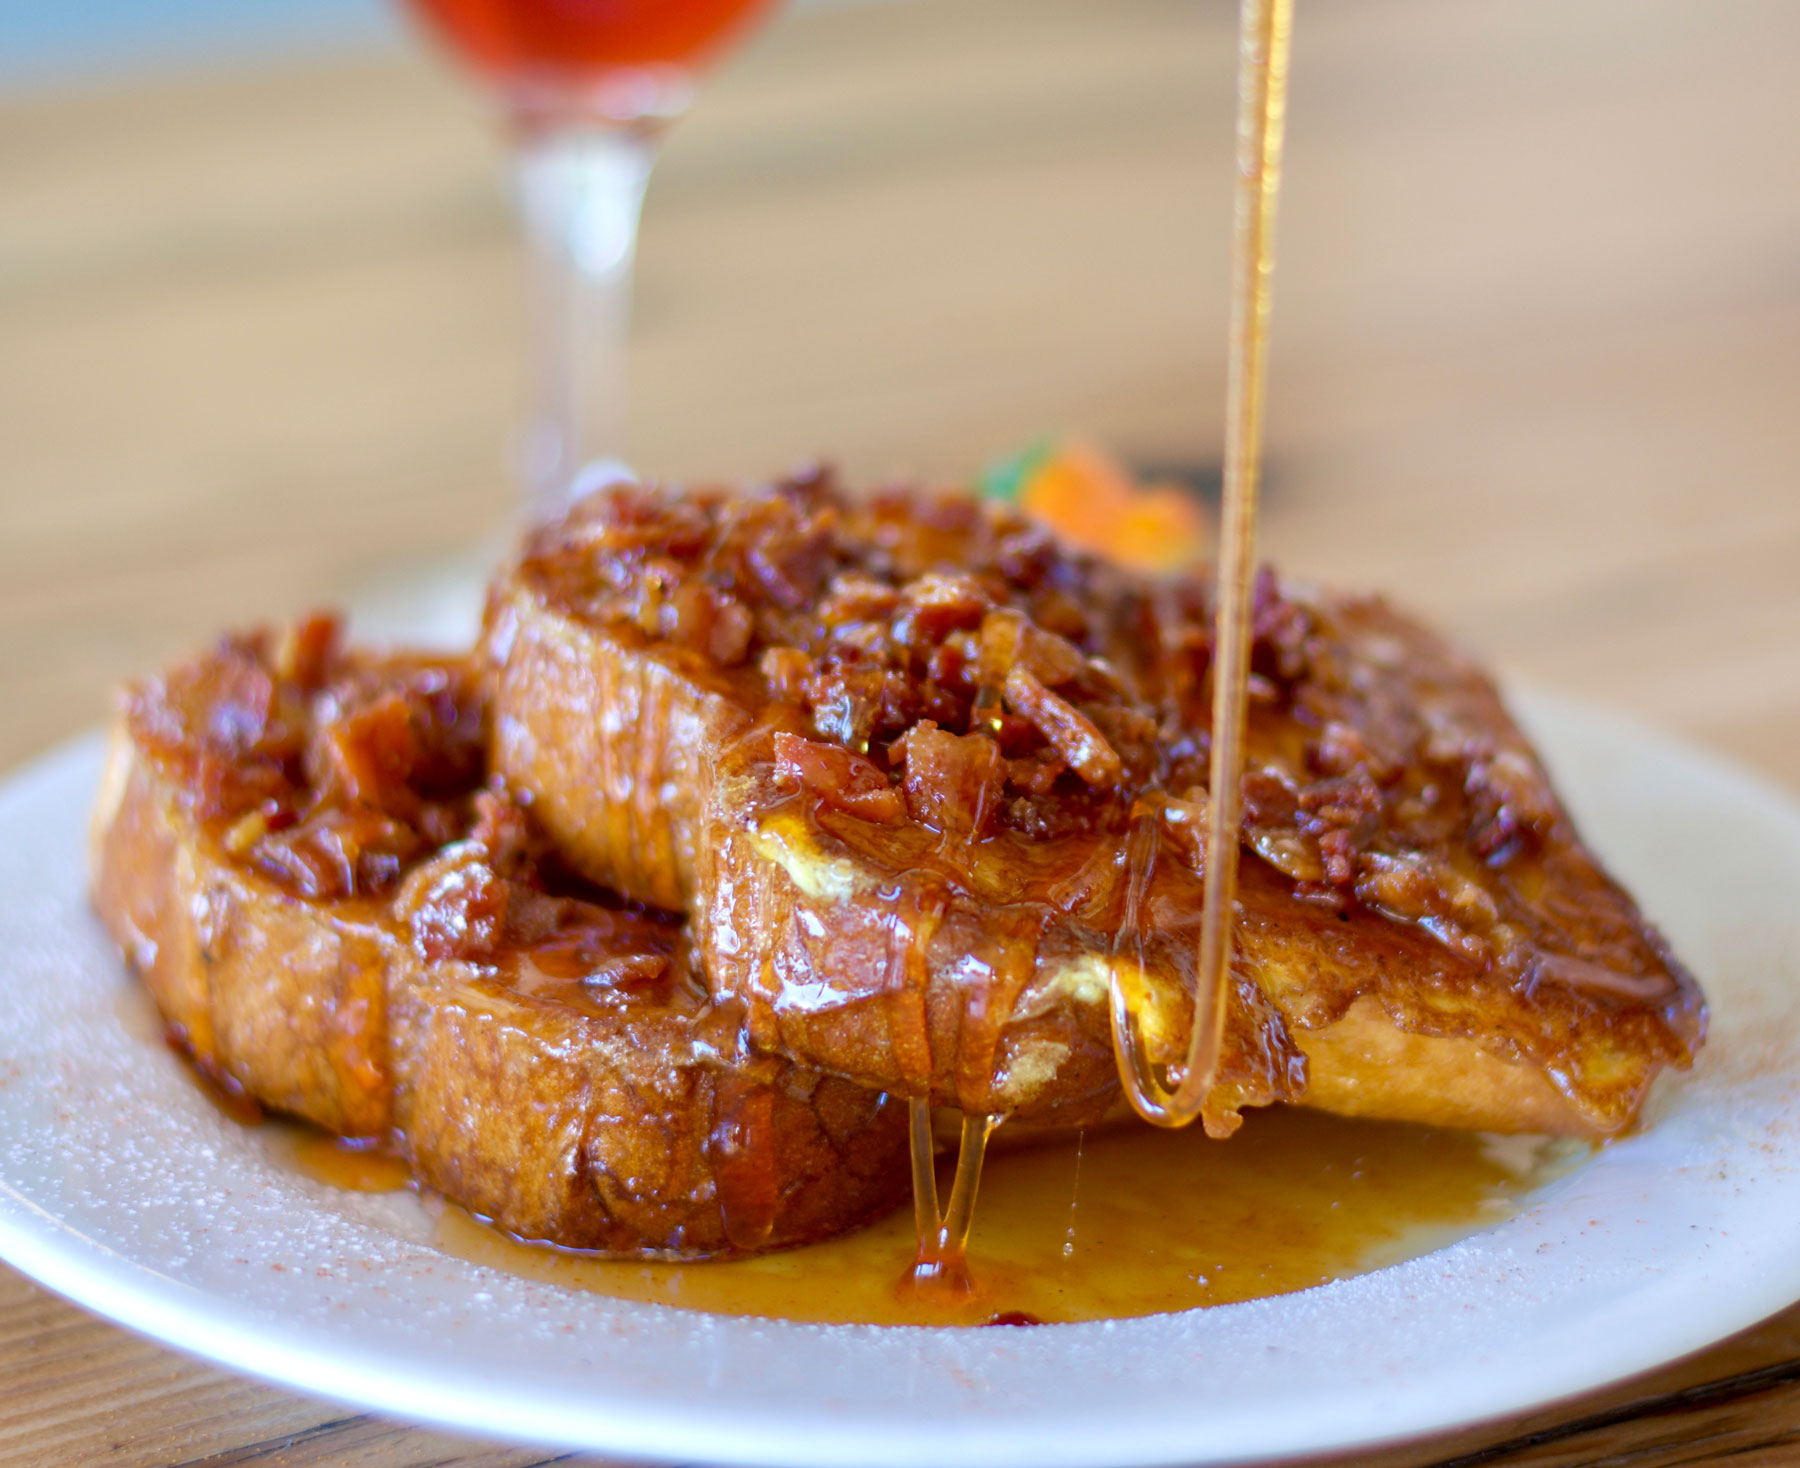 January's Bacon Hot Honey French Toast at Ghini's French Caffe 